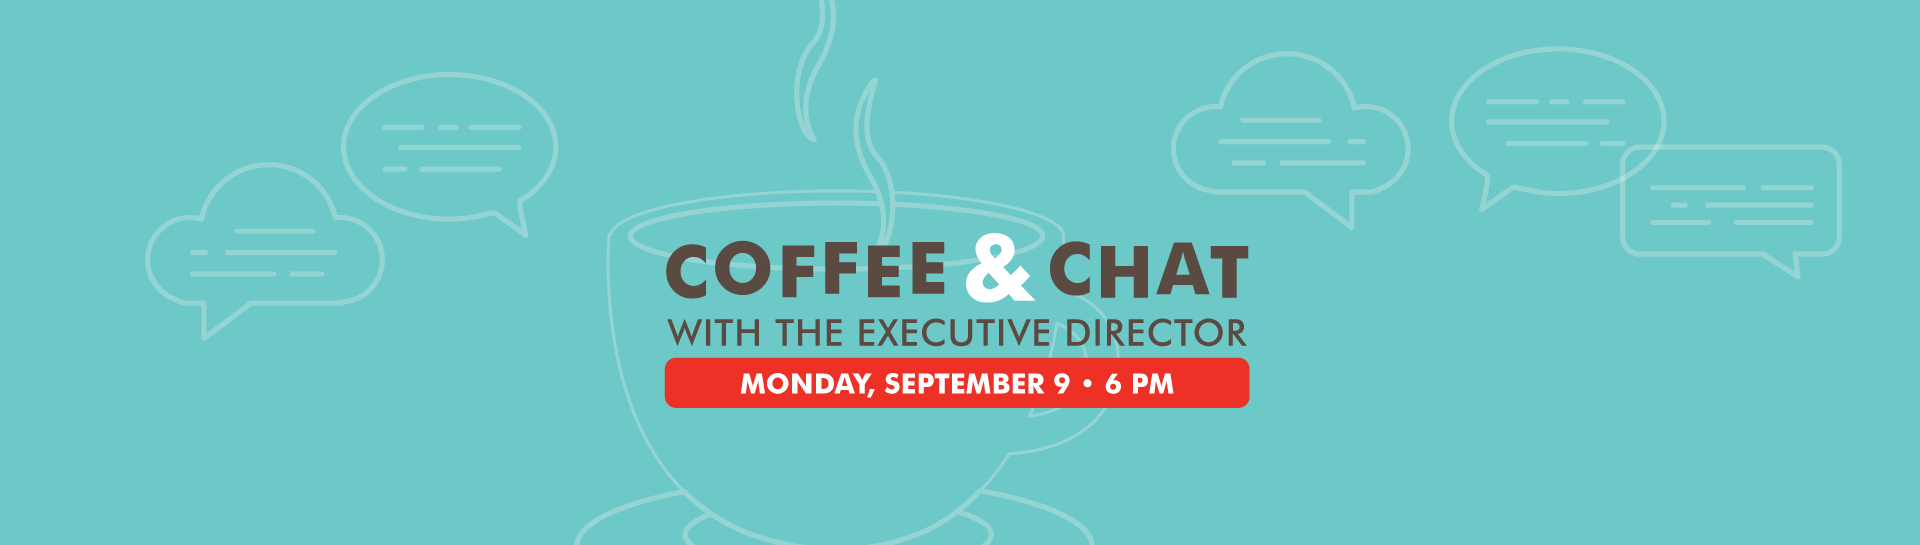 Coffee & Chat with the Executive Director - September 9th at 6:00 p.m.